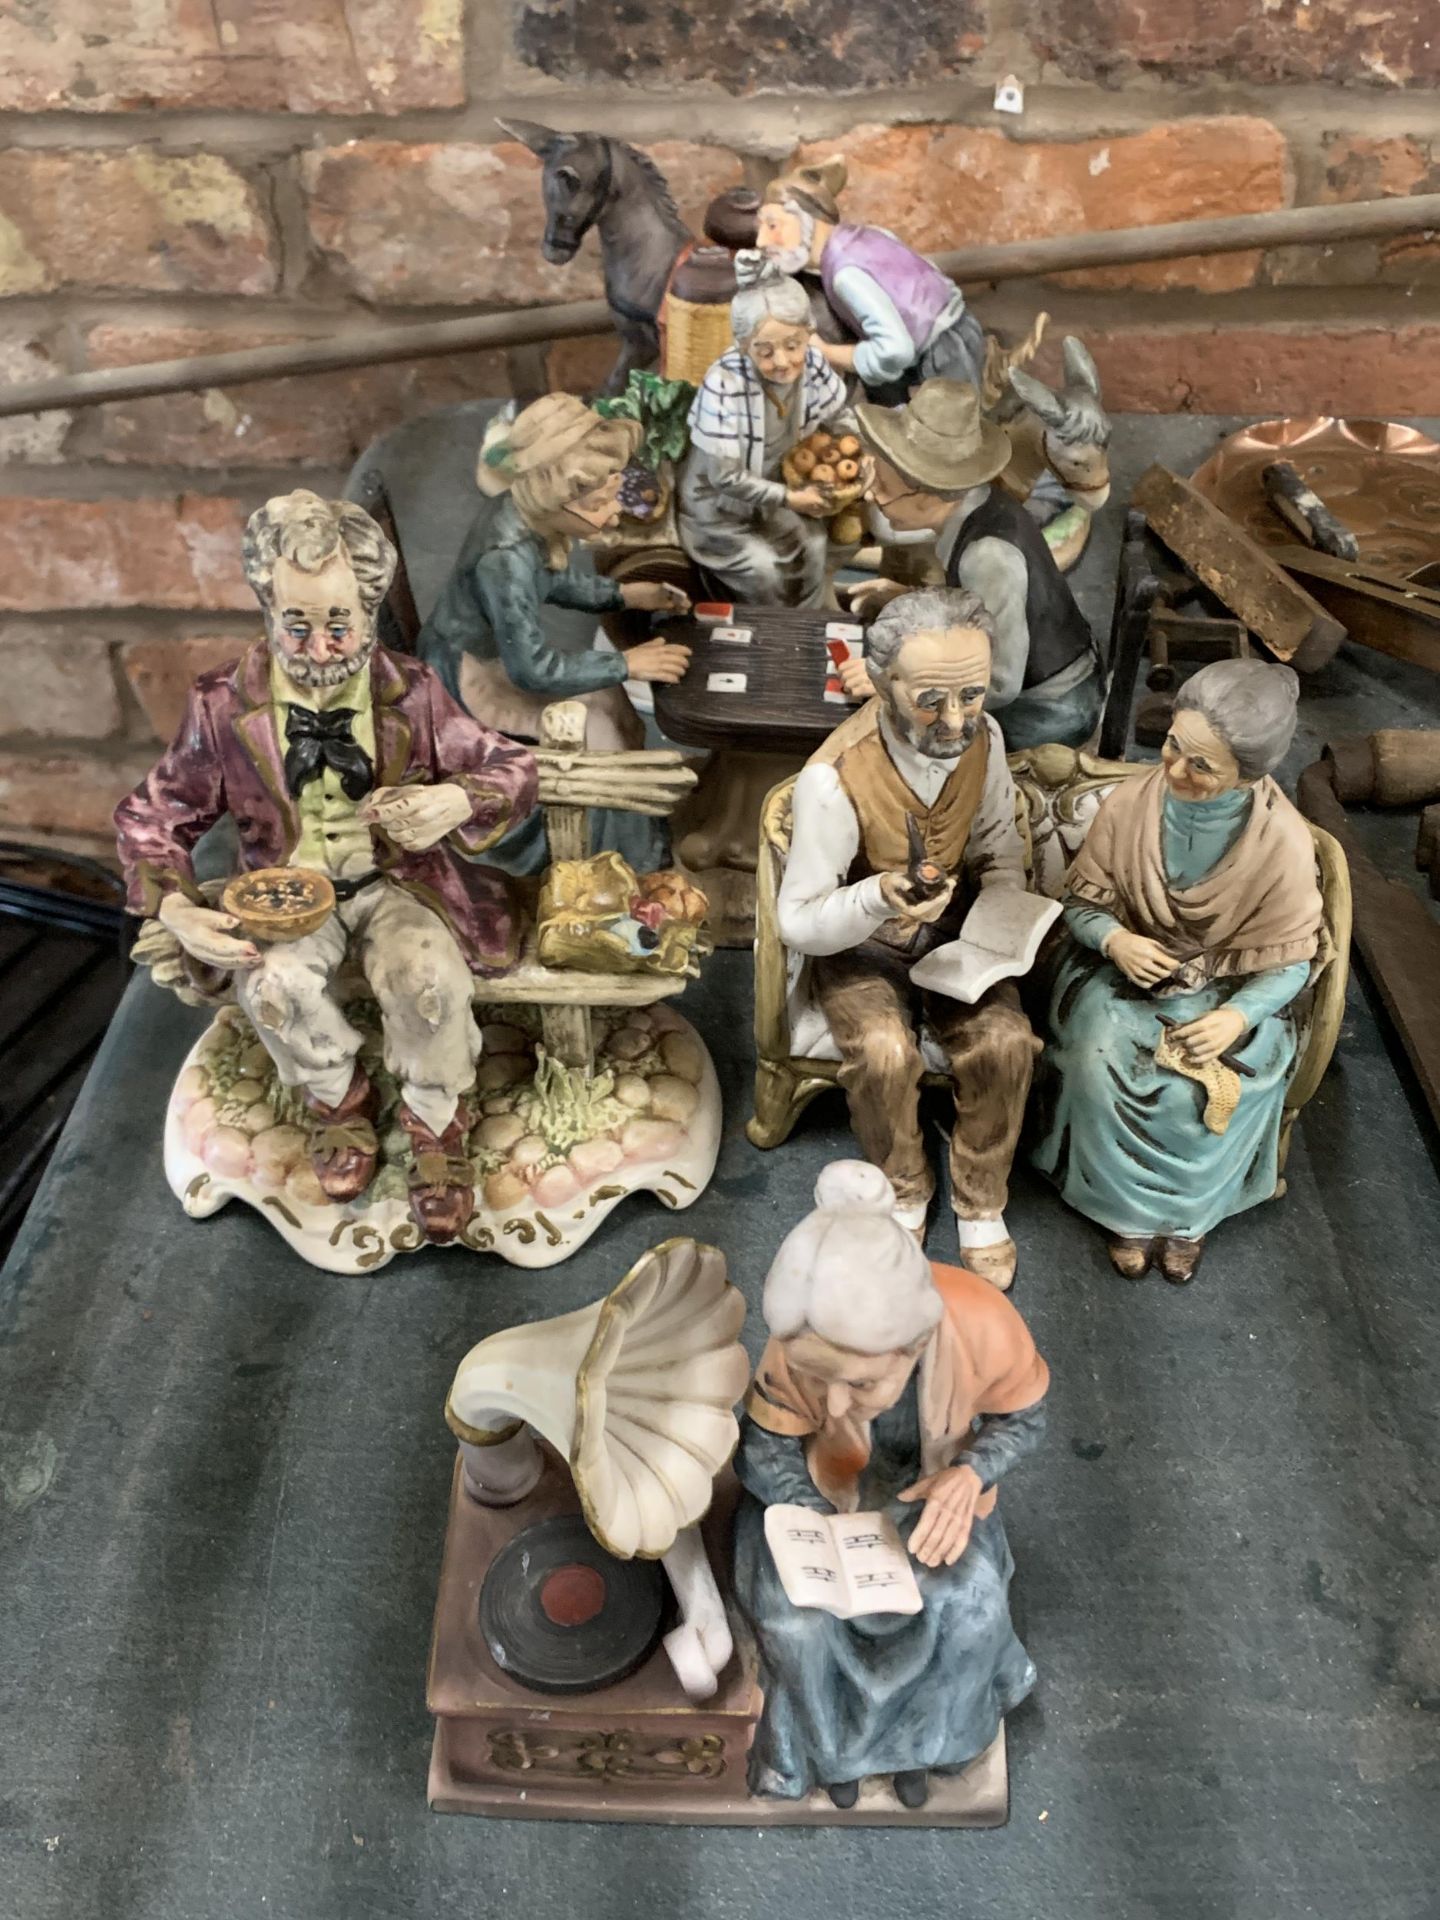 SIX CHALKWARE FIGURINES FEATURING A COUPLE PLAYING CARD GAMES, LADY WITH DONKEY AND CART ETC